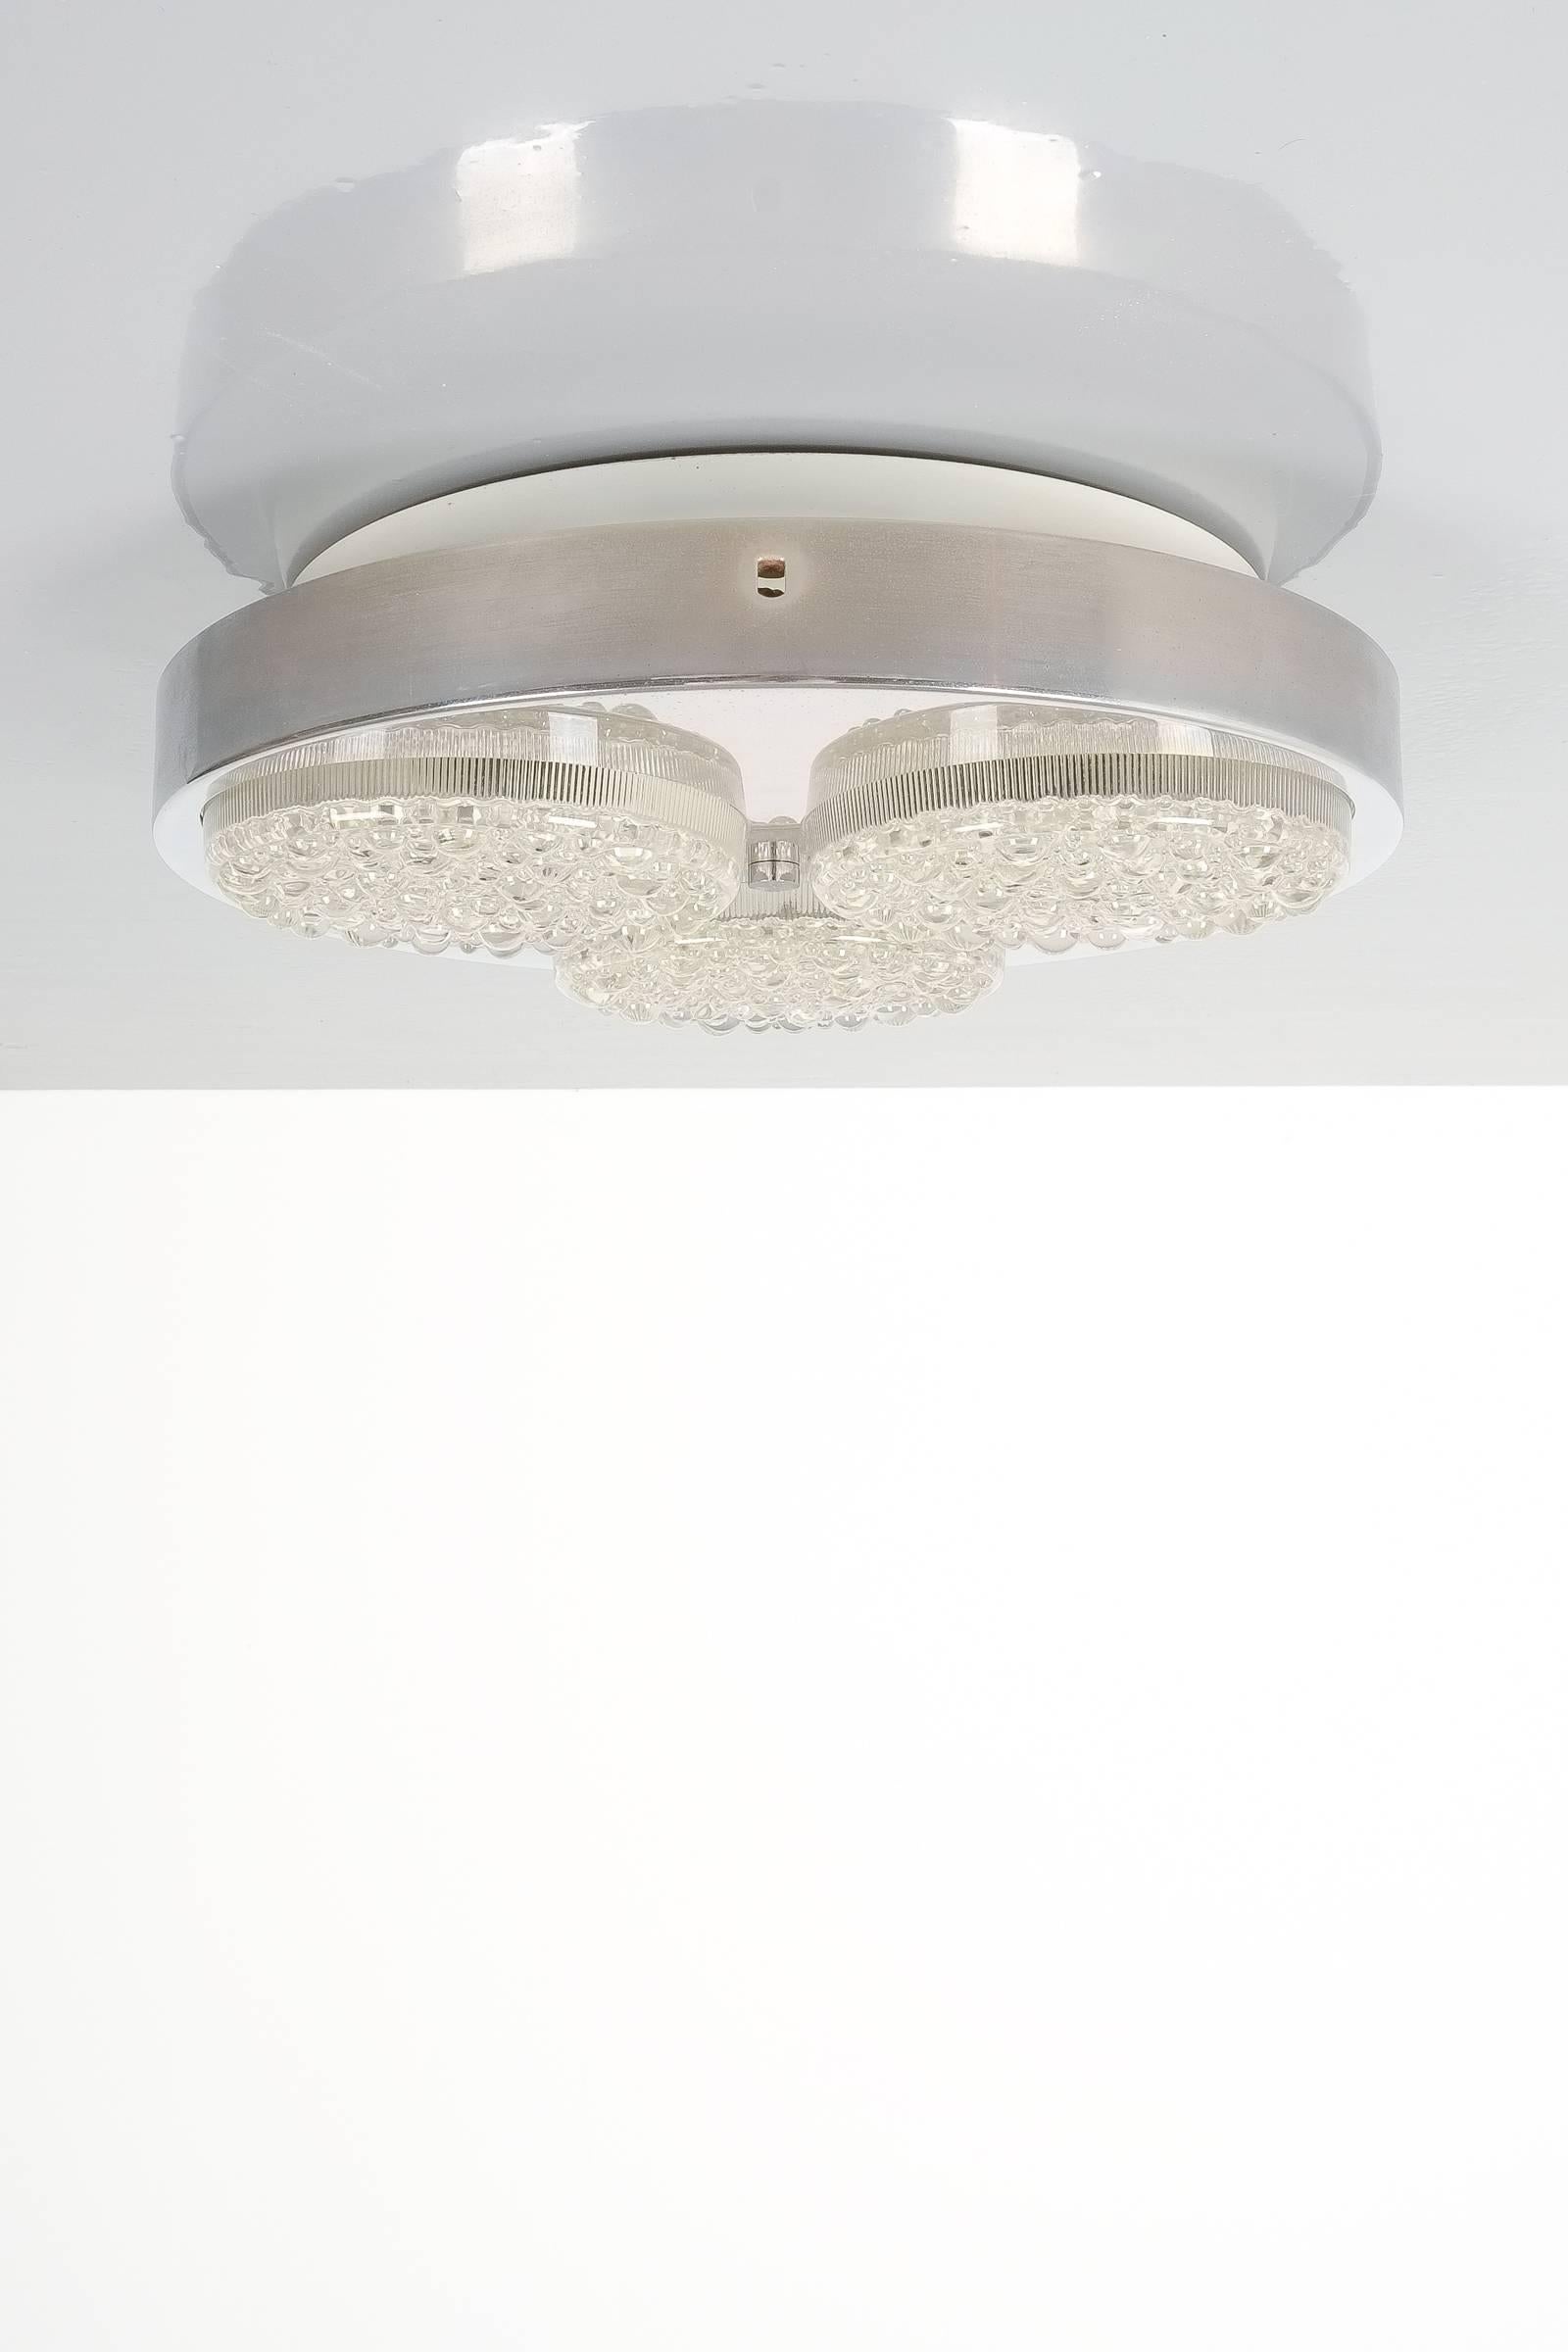 Textured Glass and Aluminum Flush Mount fixture light, Italy 1960. 14.2 inches in diameter, featuring 3 textured glass spots on an aluminum body with white enameled metal base. It takes 3x e14 bulbs with 40W max (supports Led) Measurements are 14.2x